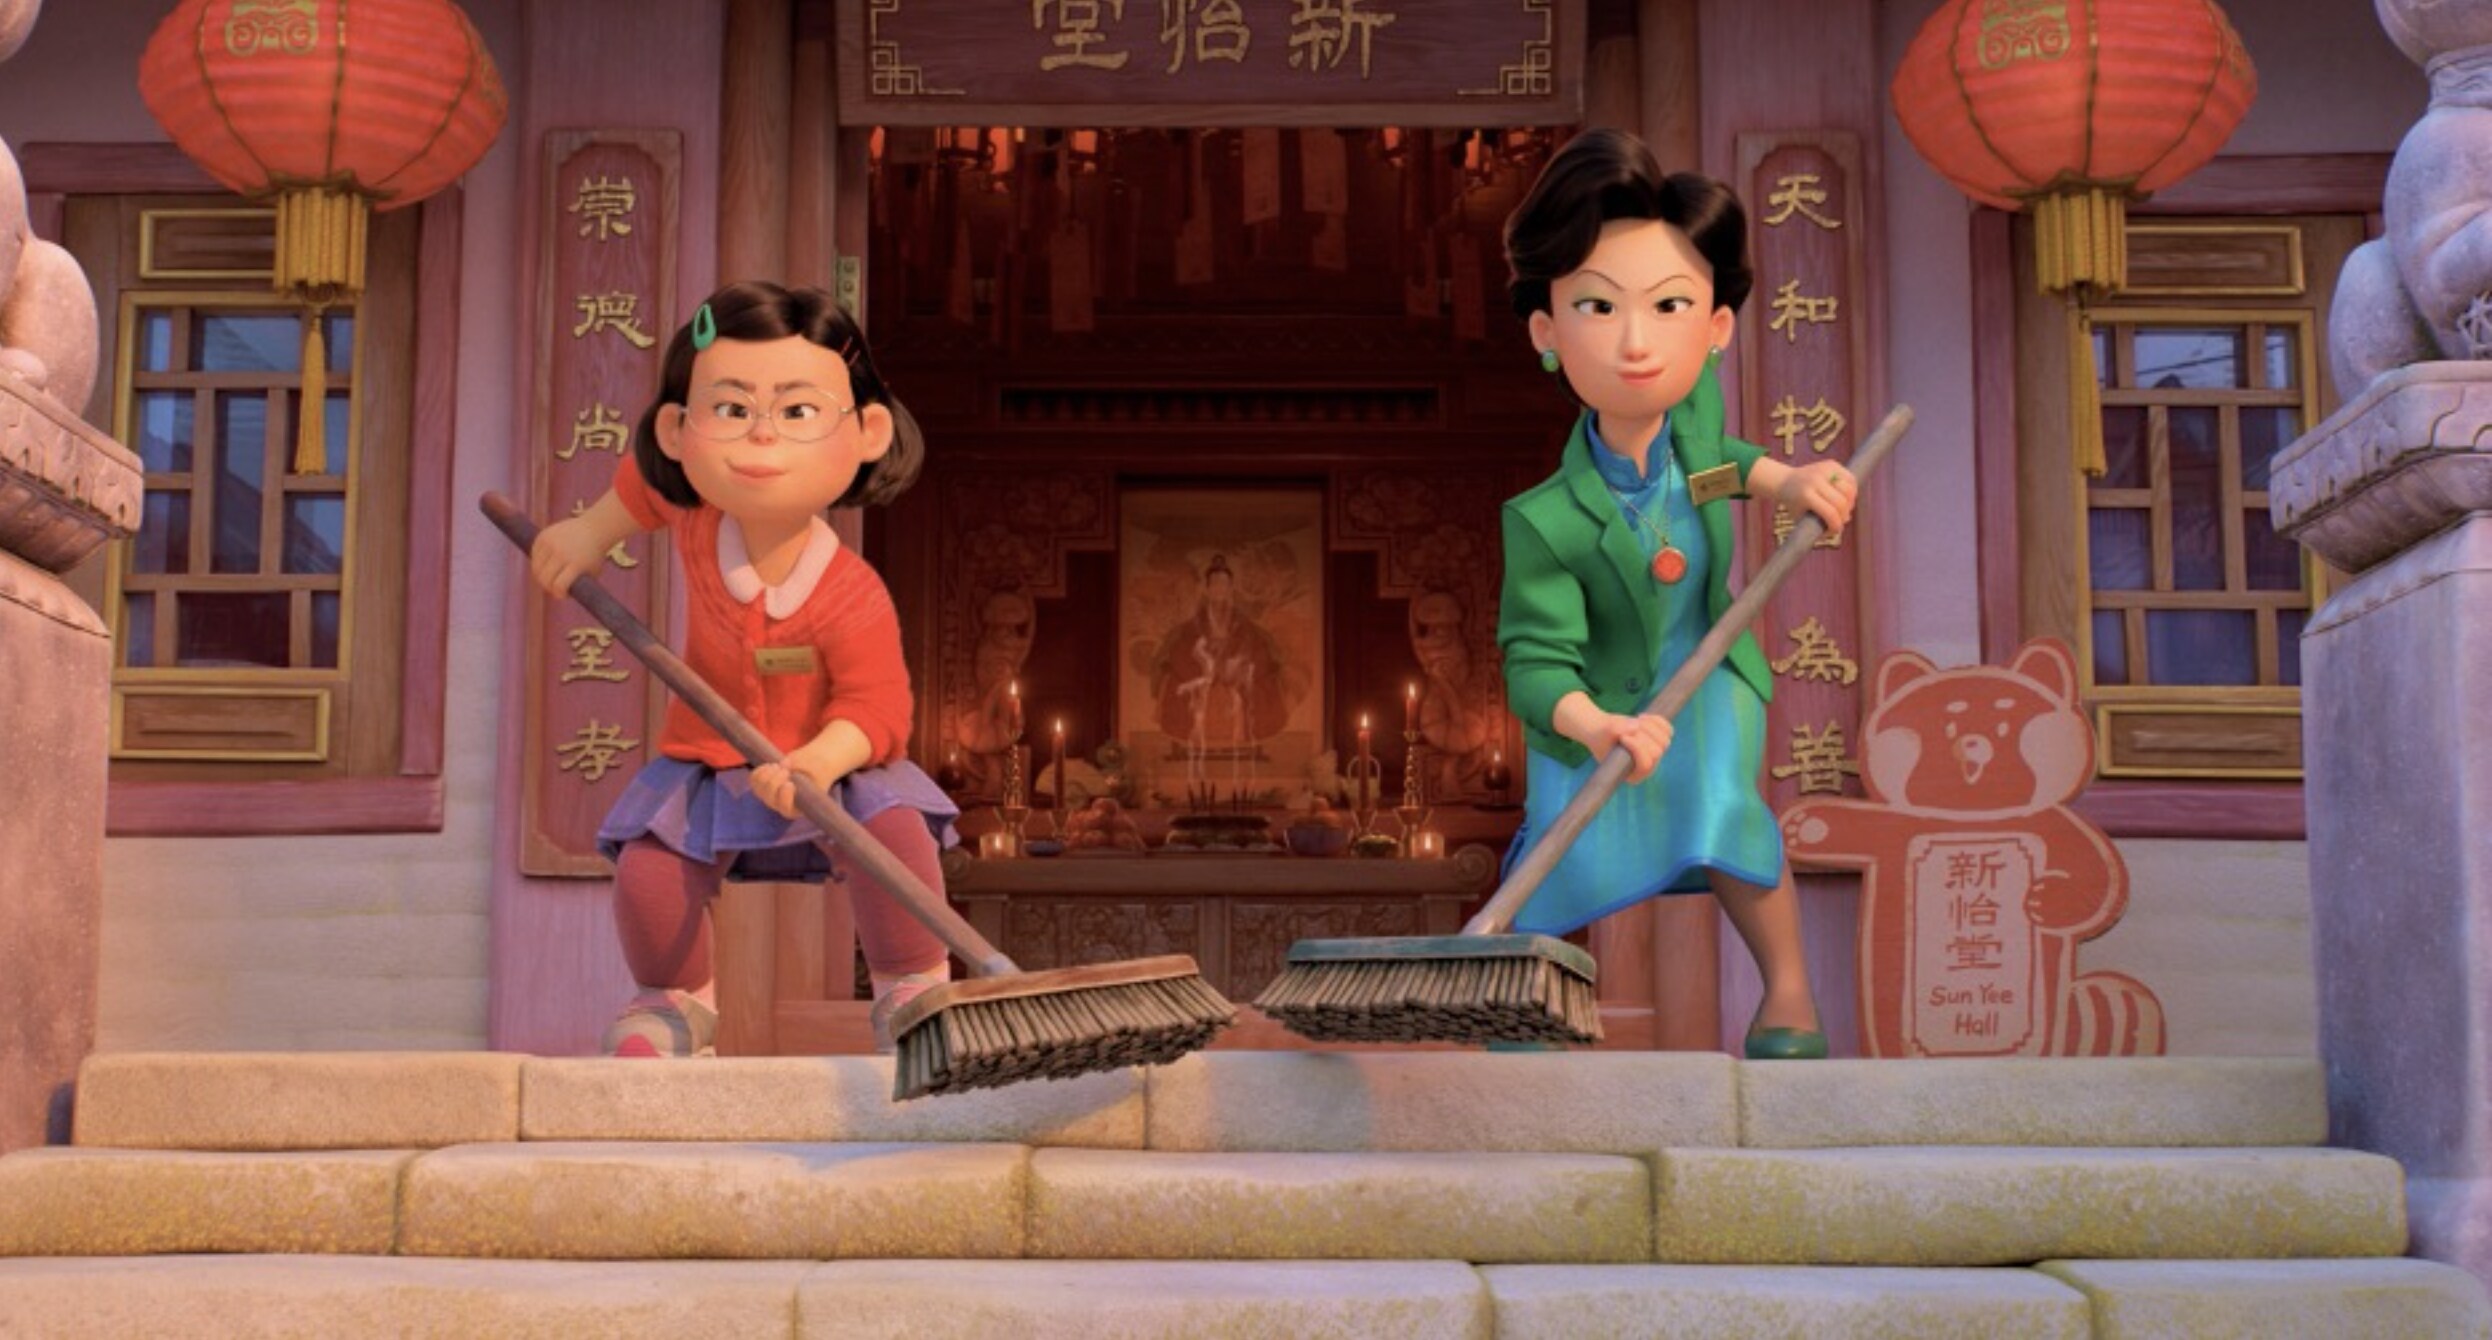 Meilin Lee and her mom are ready to clean in Disney and Pixar’s Turning Red